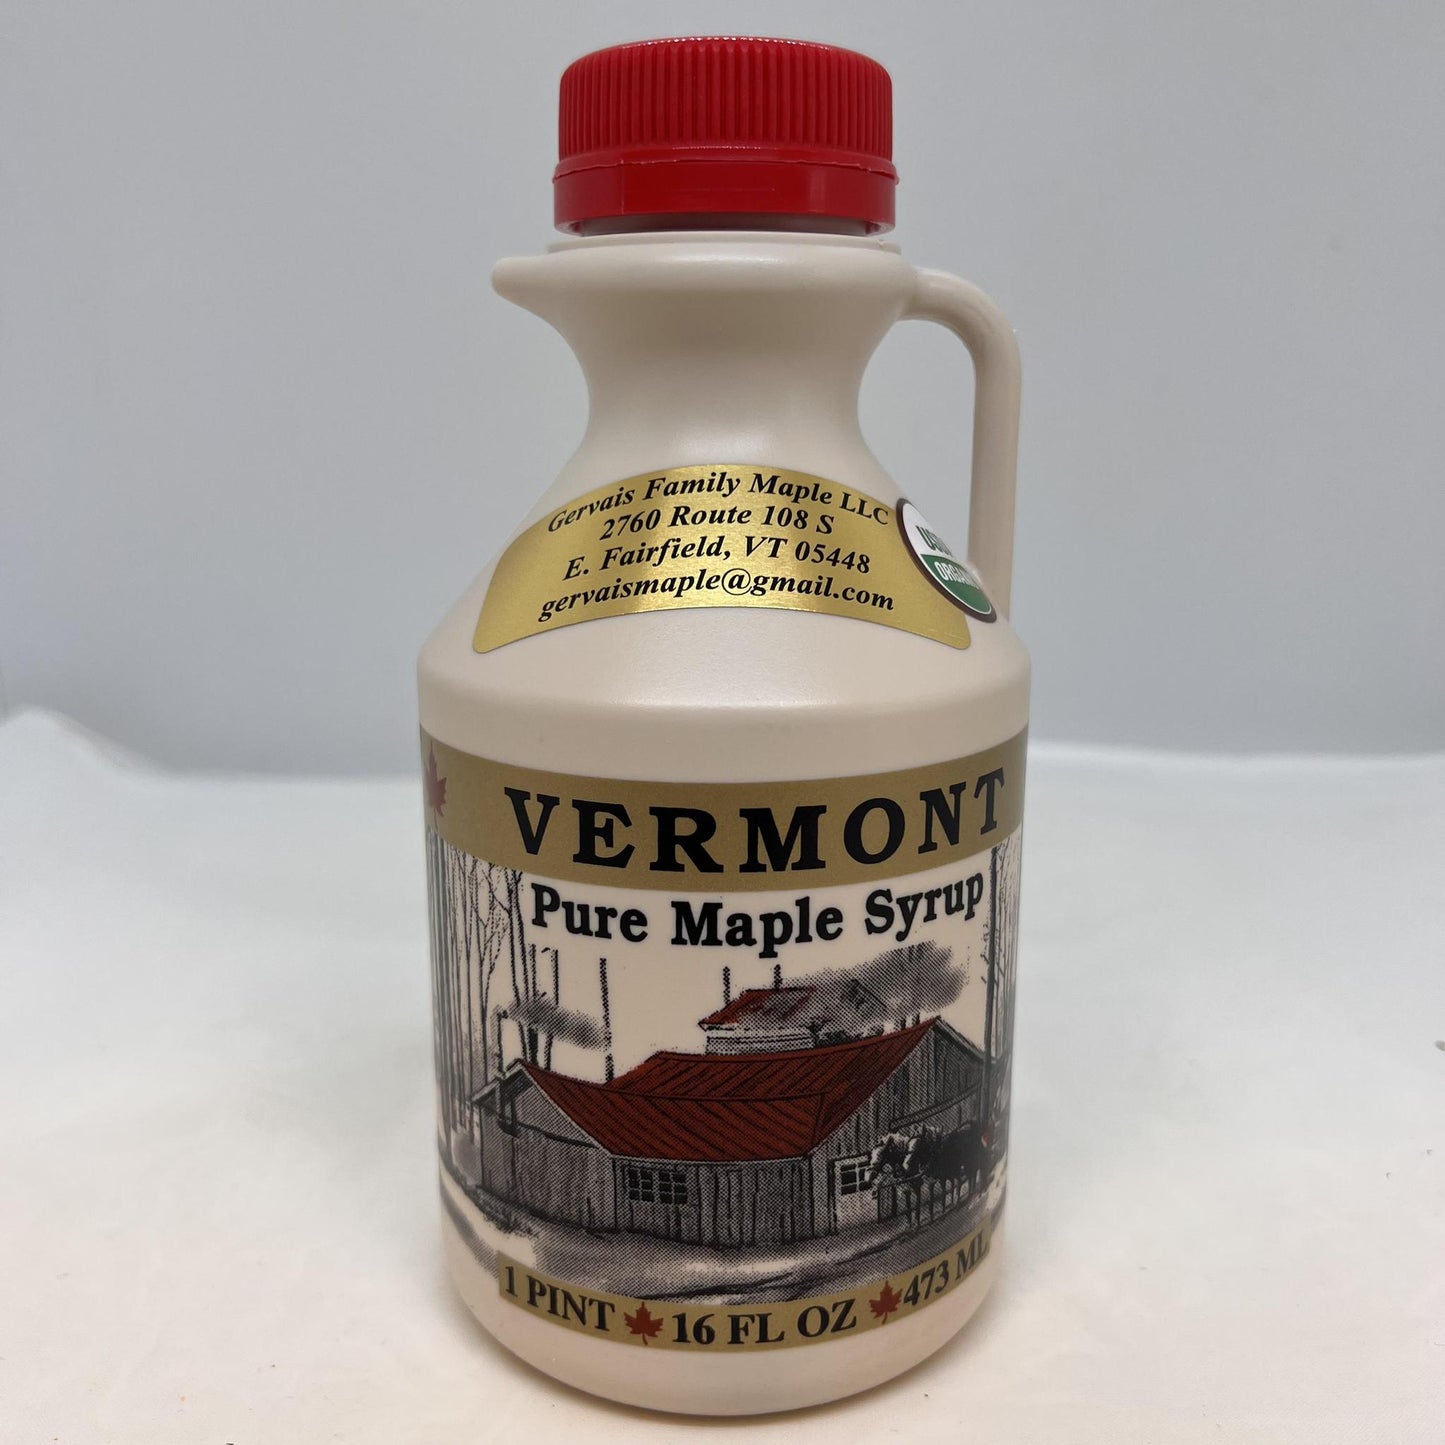 Gervais Family Maple Organic Syrup Pint